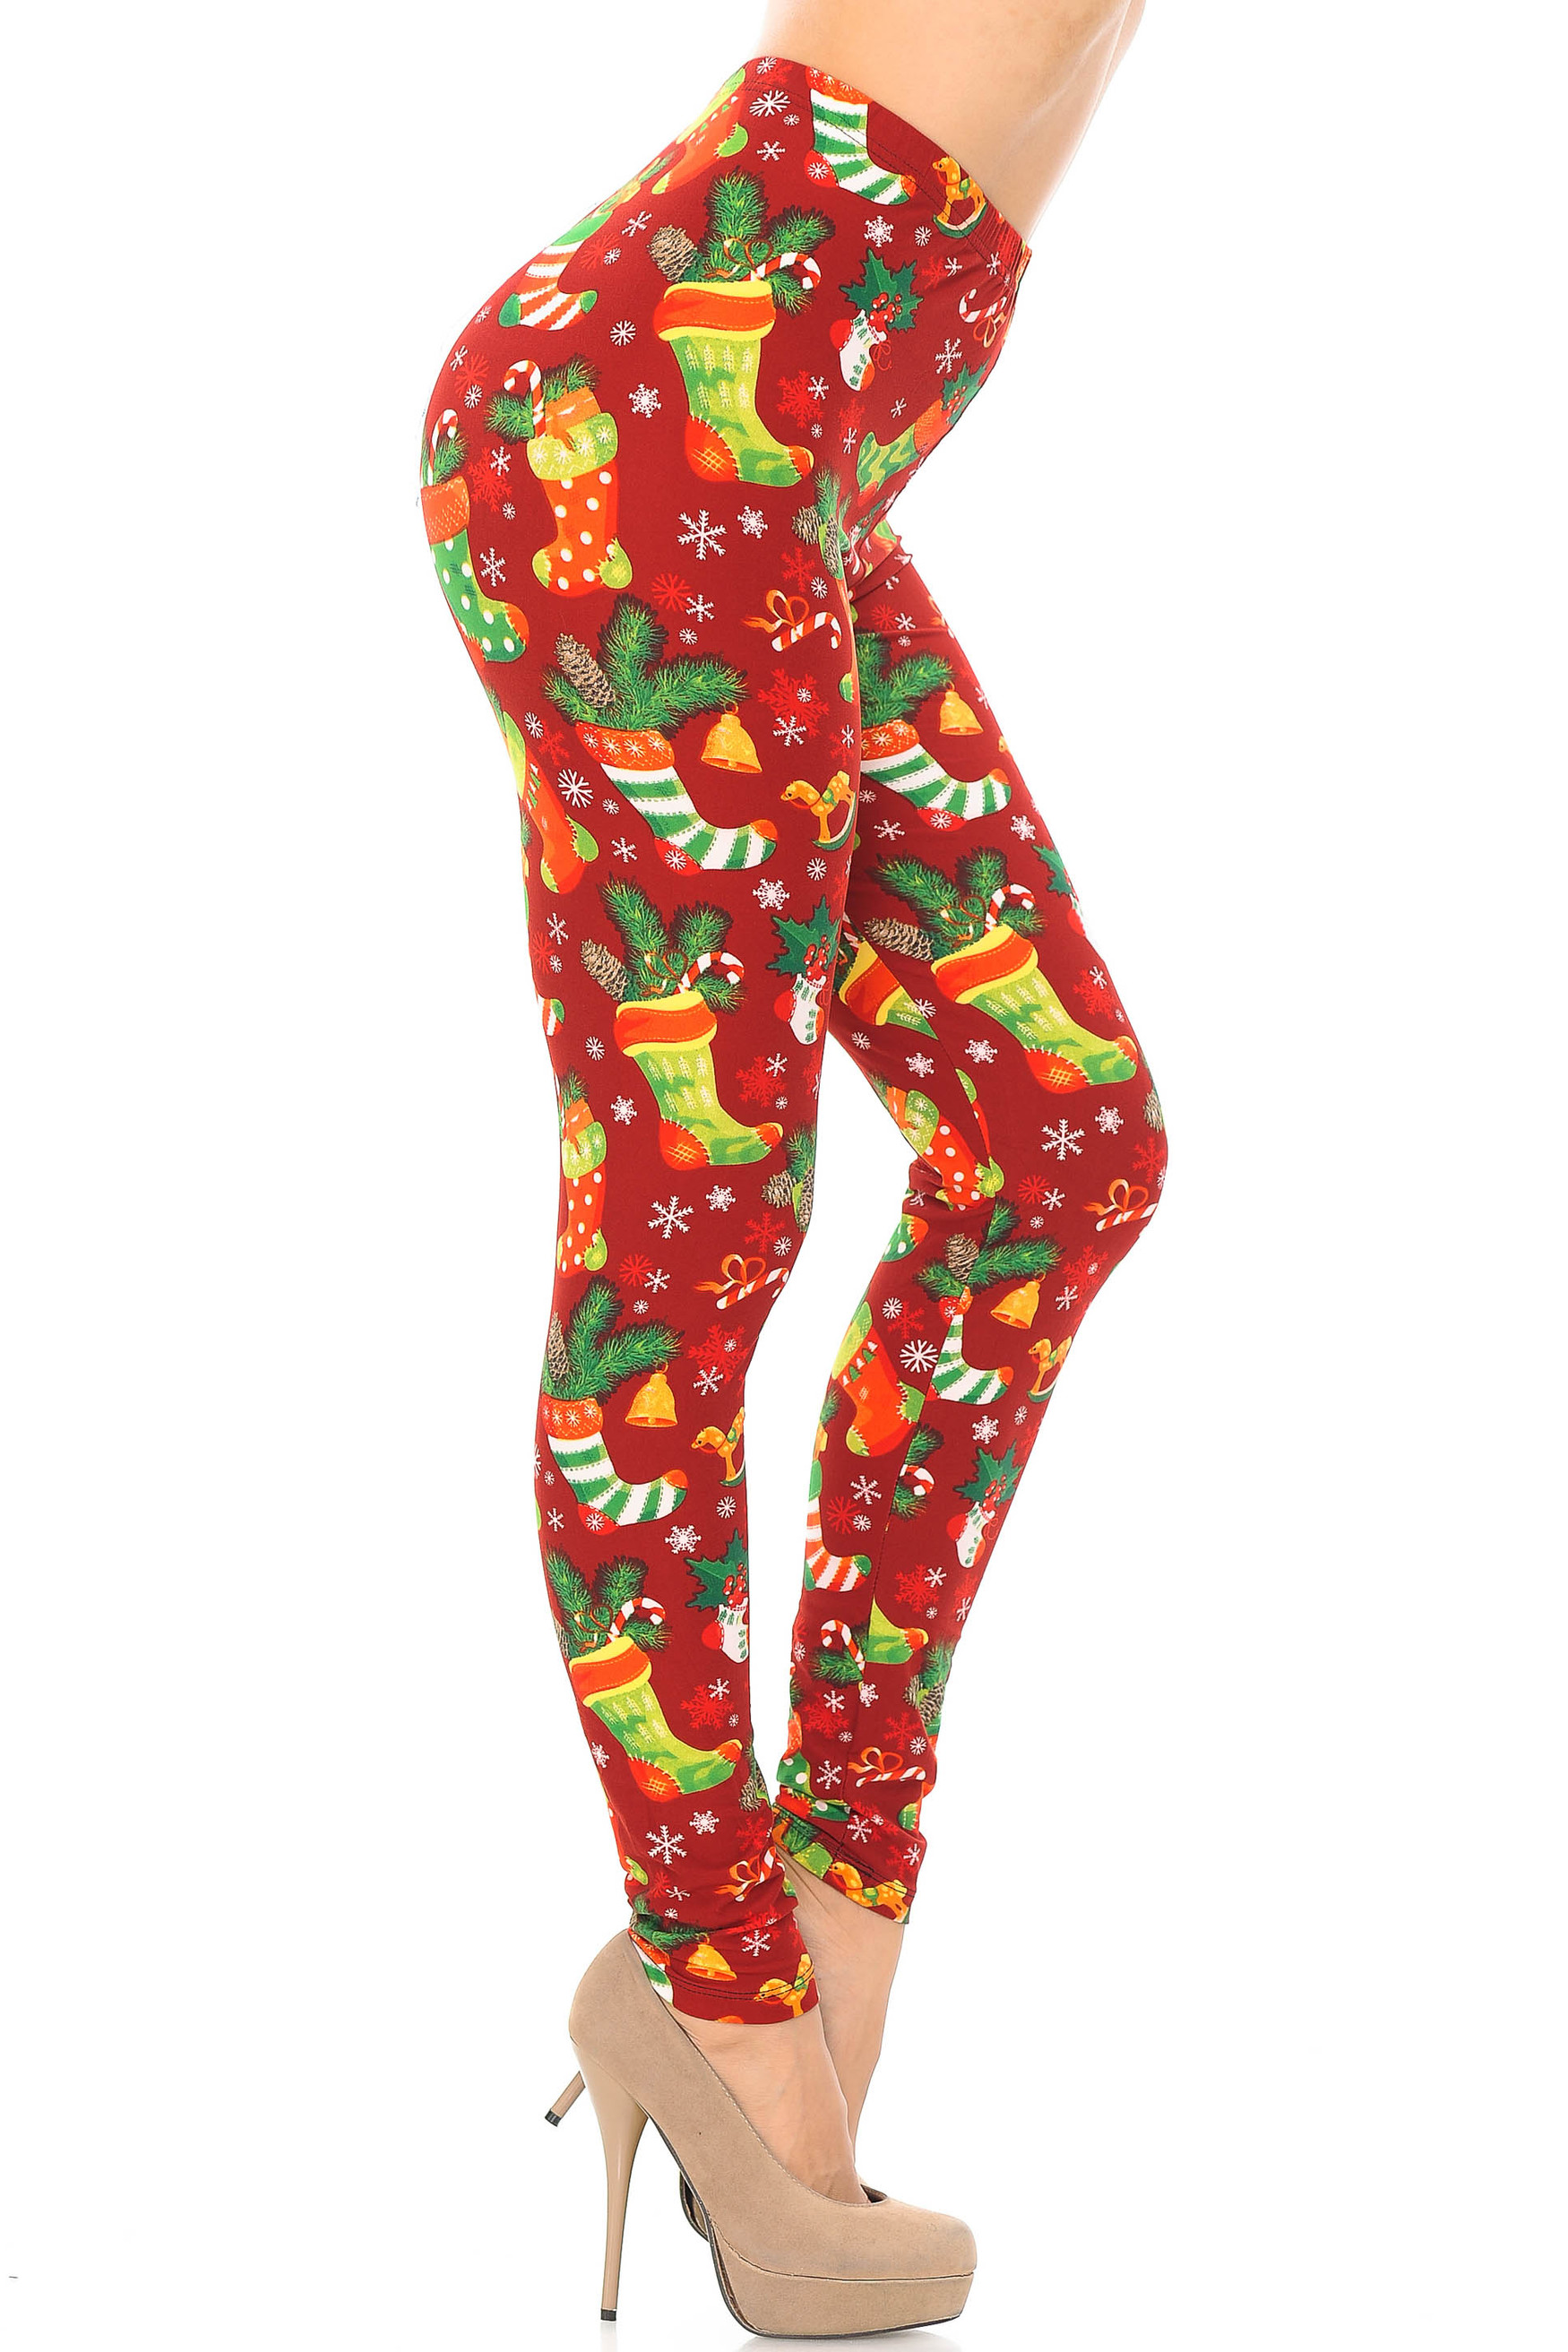 Buttery Soft Ruby Red Christmas Stocking Extra Plus Size Leggings - 3X-5X